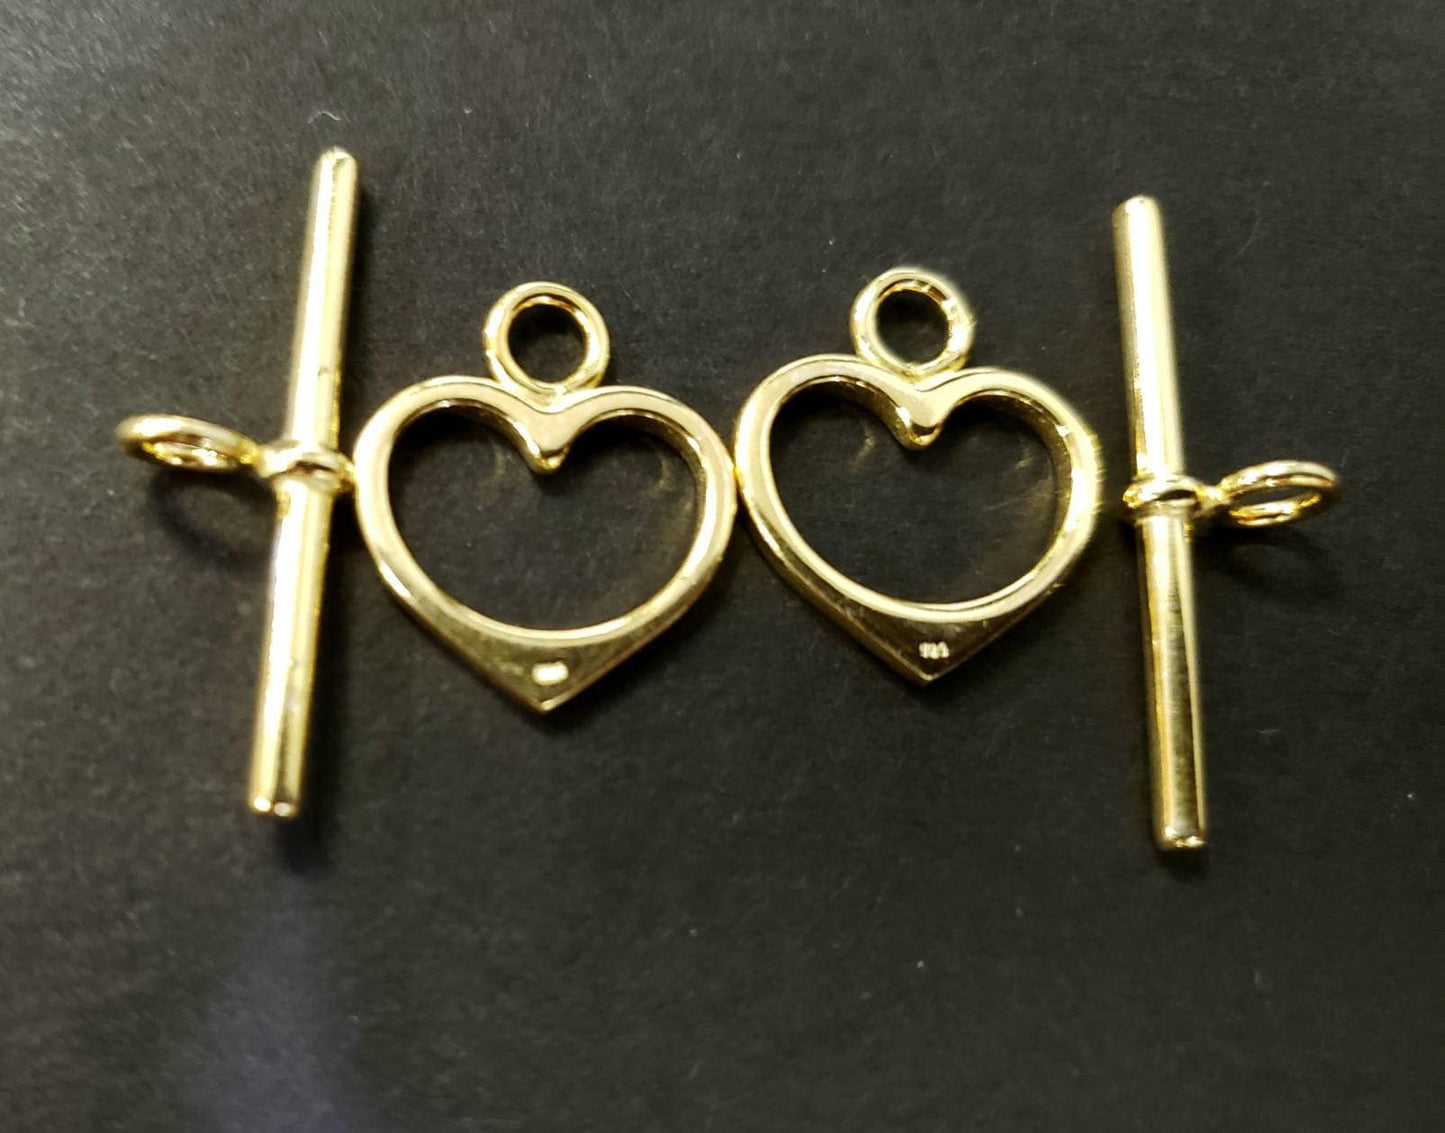 18k gold vermeil 14mm heart toggle clasp.1 set,18k gold over 925 Sterling Silver.925 stamped,high quality